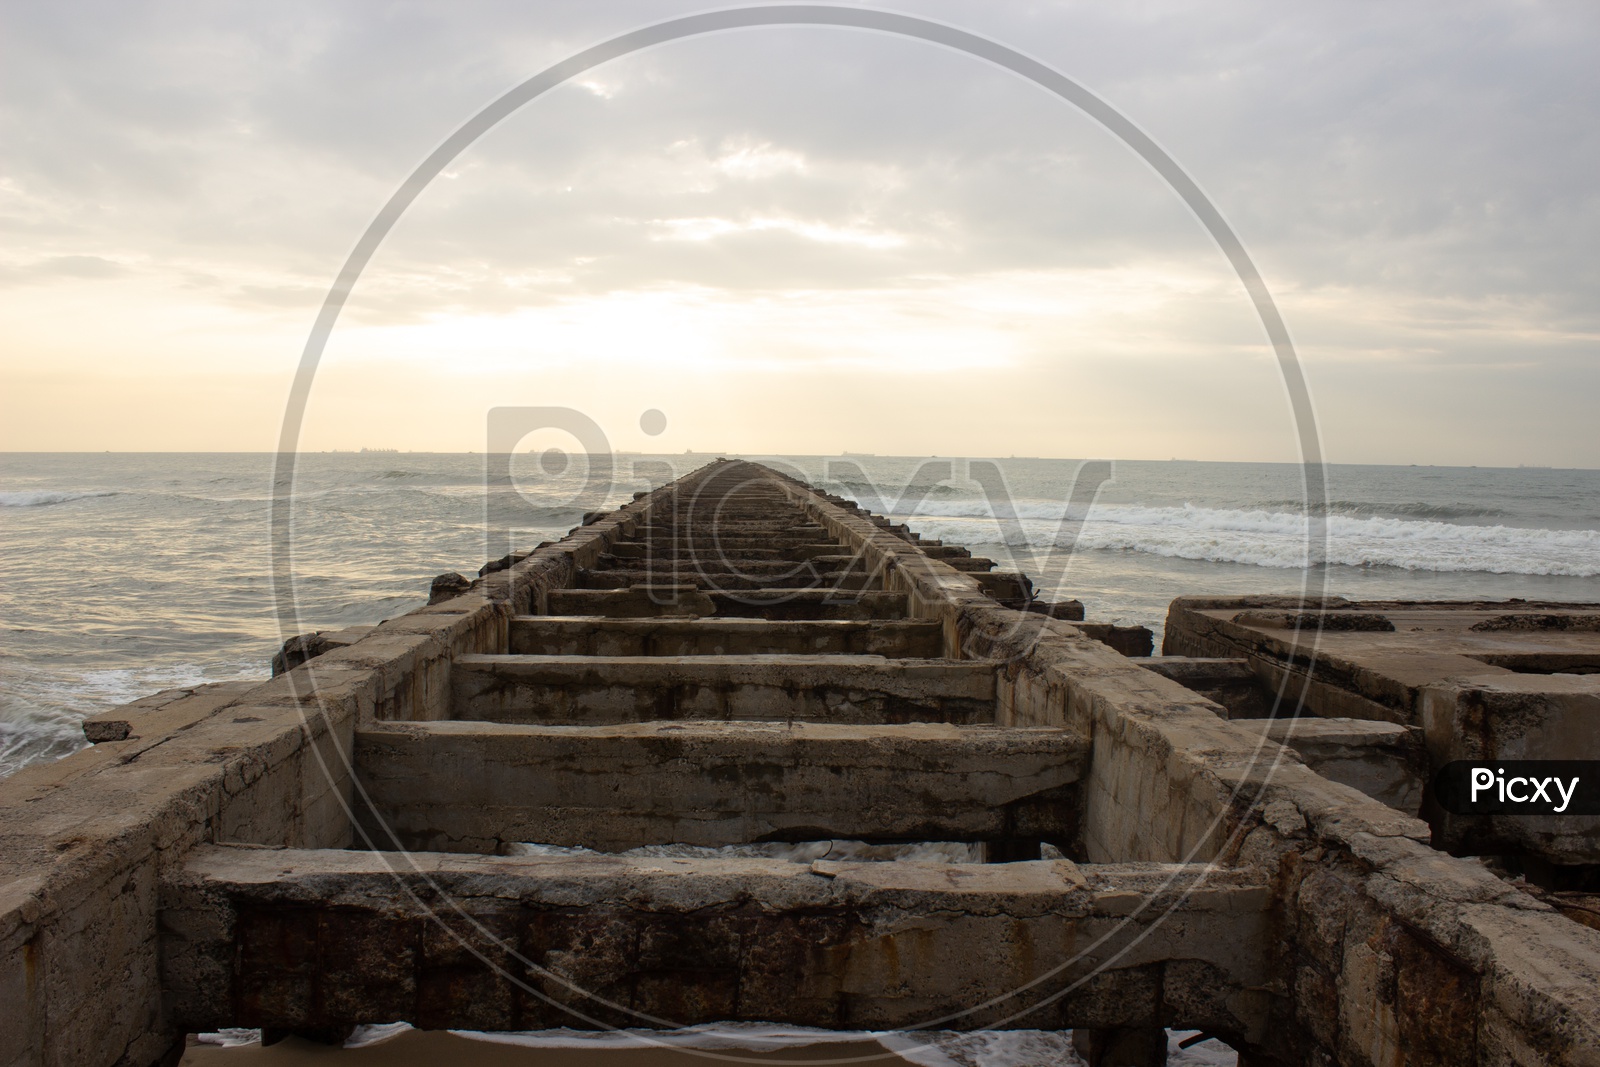 A Pier Closeup Shot Leading To Sea with Structures of Pillars